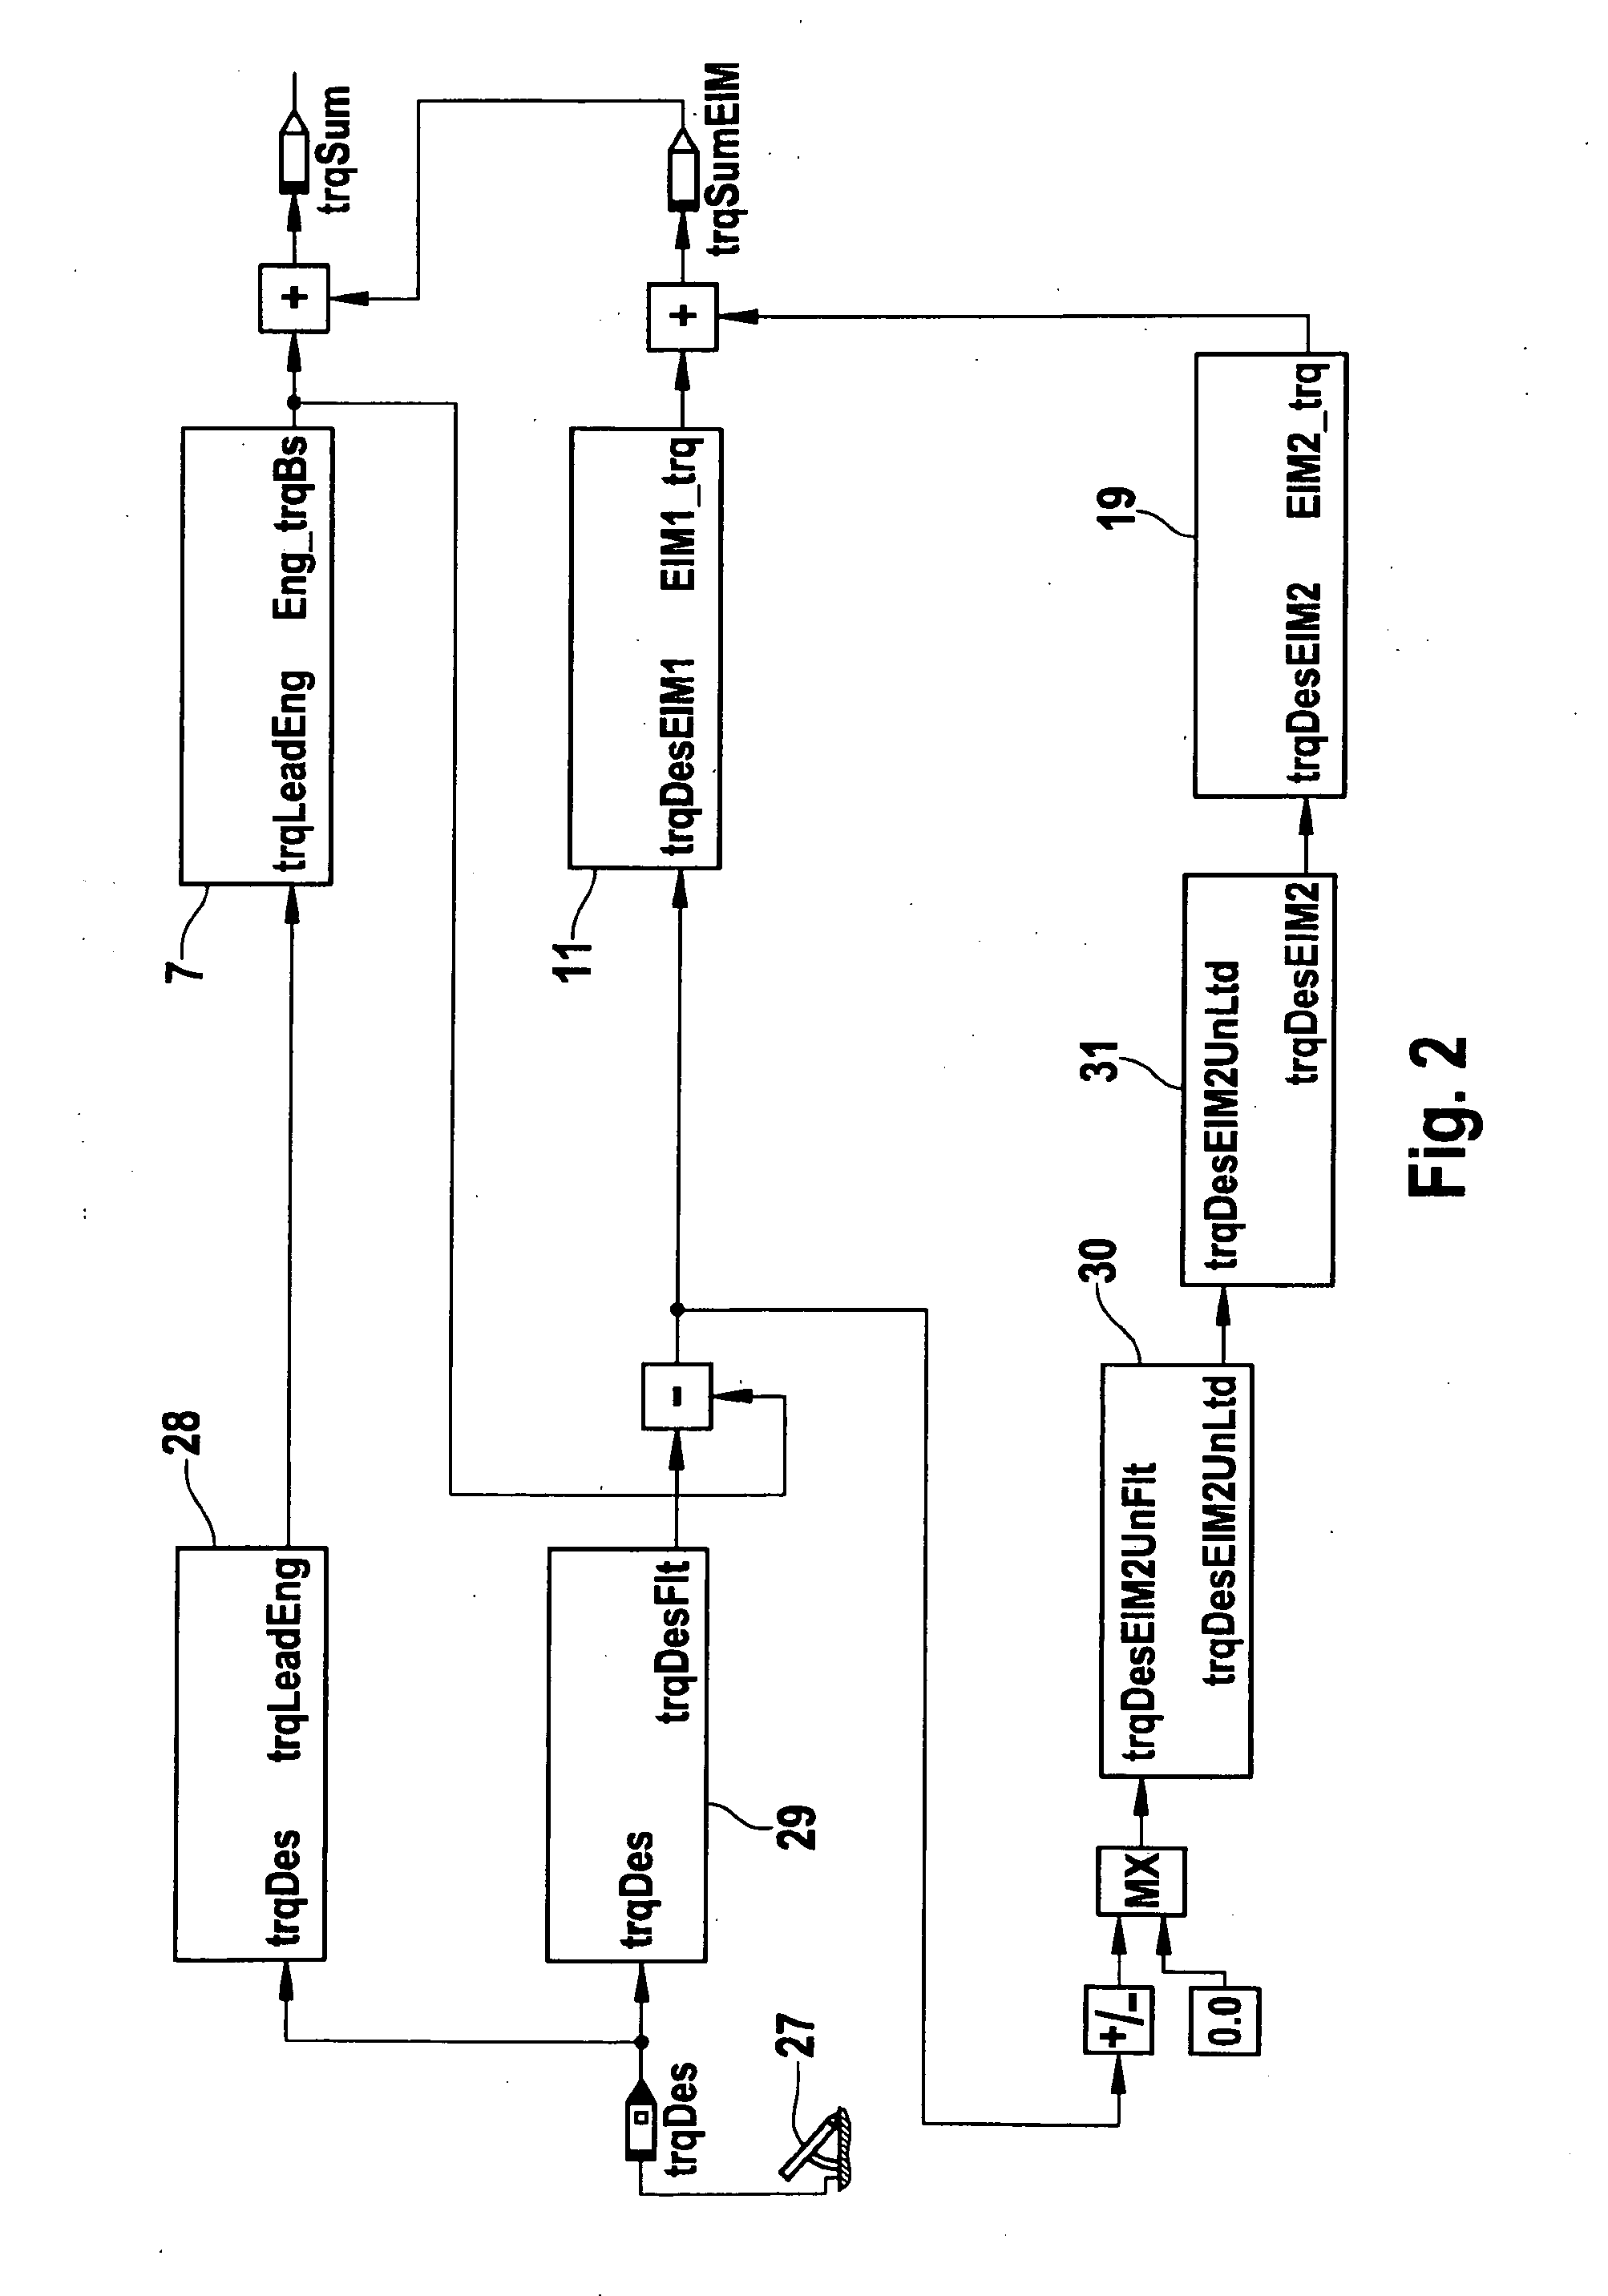 Method for operating a hybrid drive of a motor vehicle